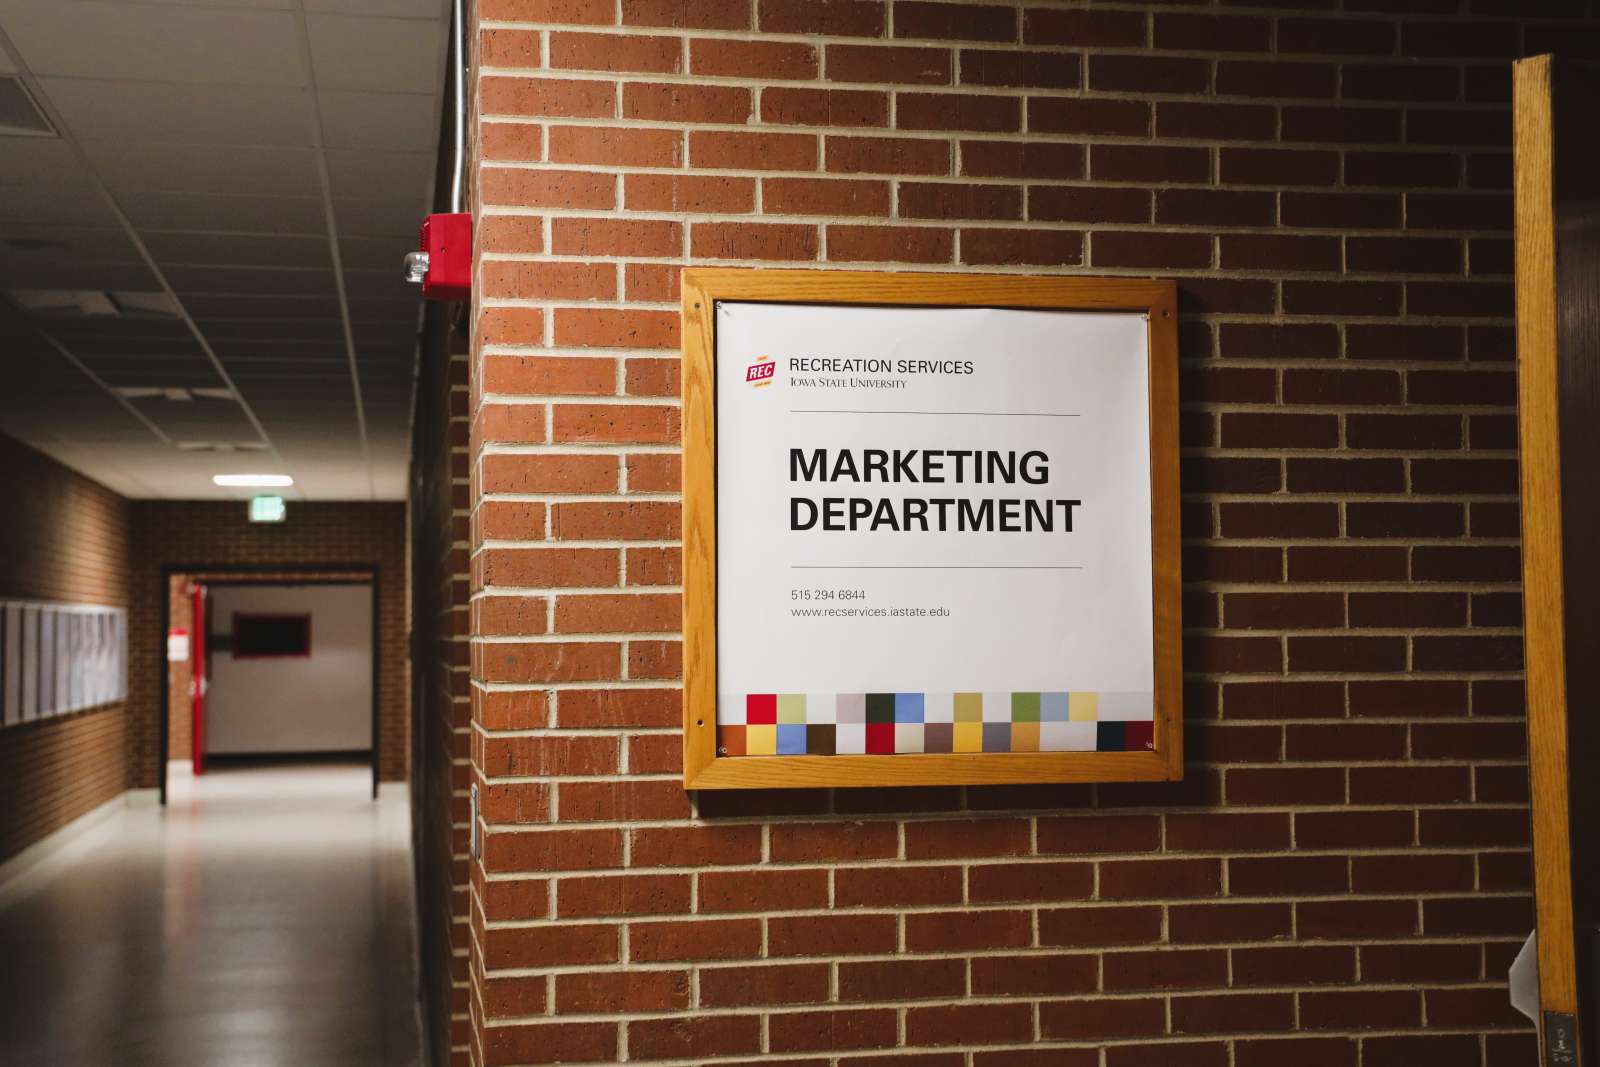 a photo of the marketing department sign